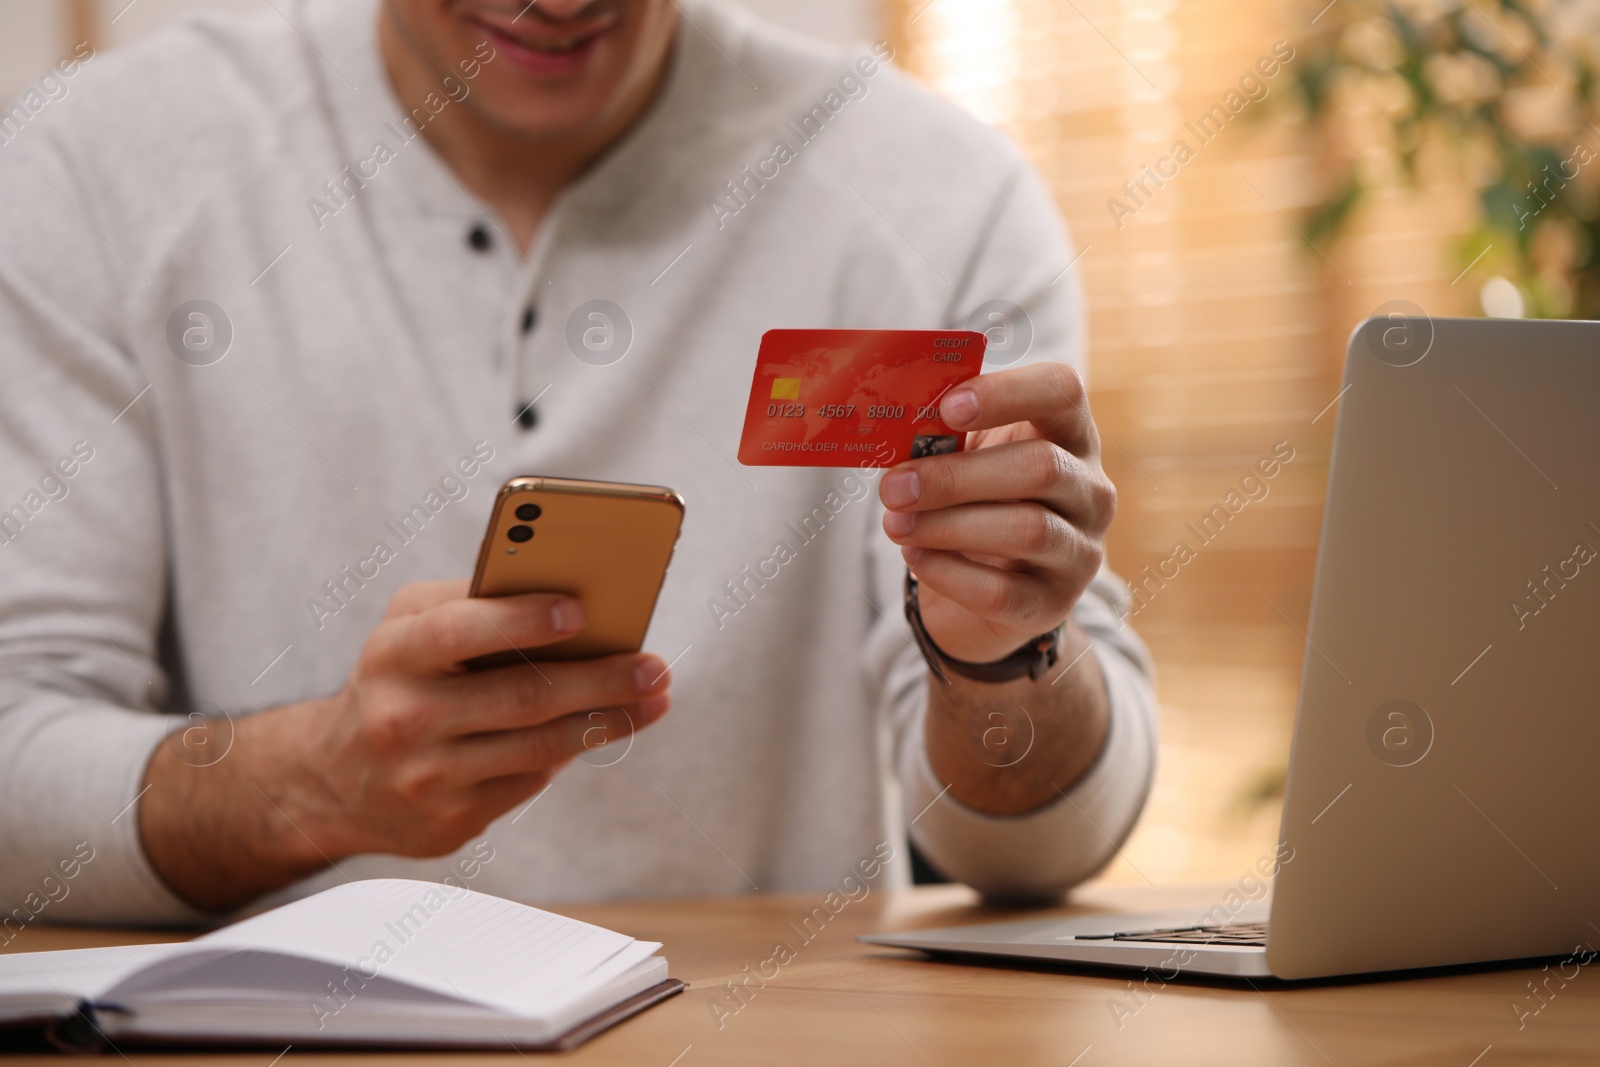 Photo of Man using smartphone and credit card for online payment at desk indoors, closeup